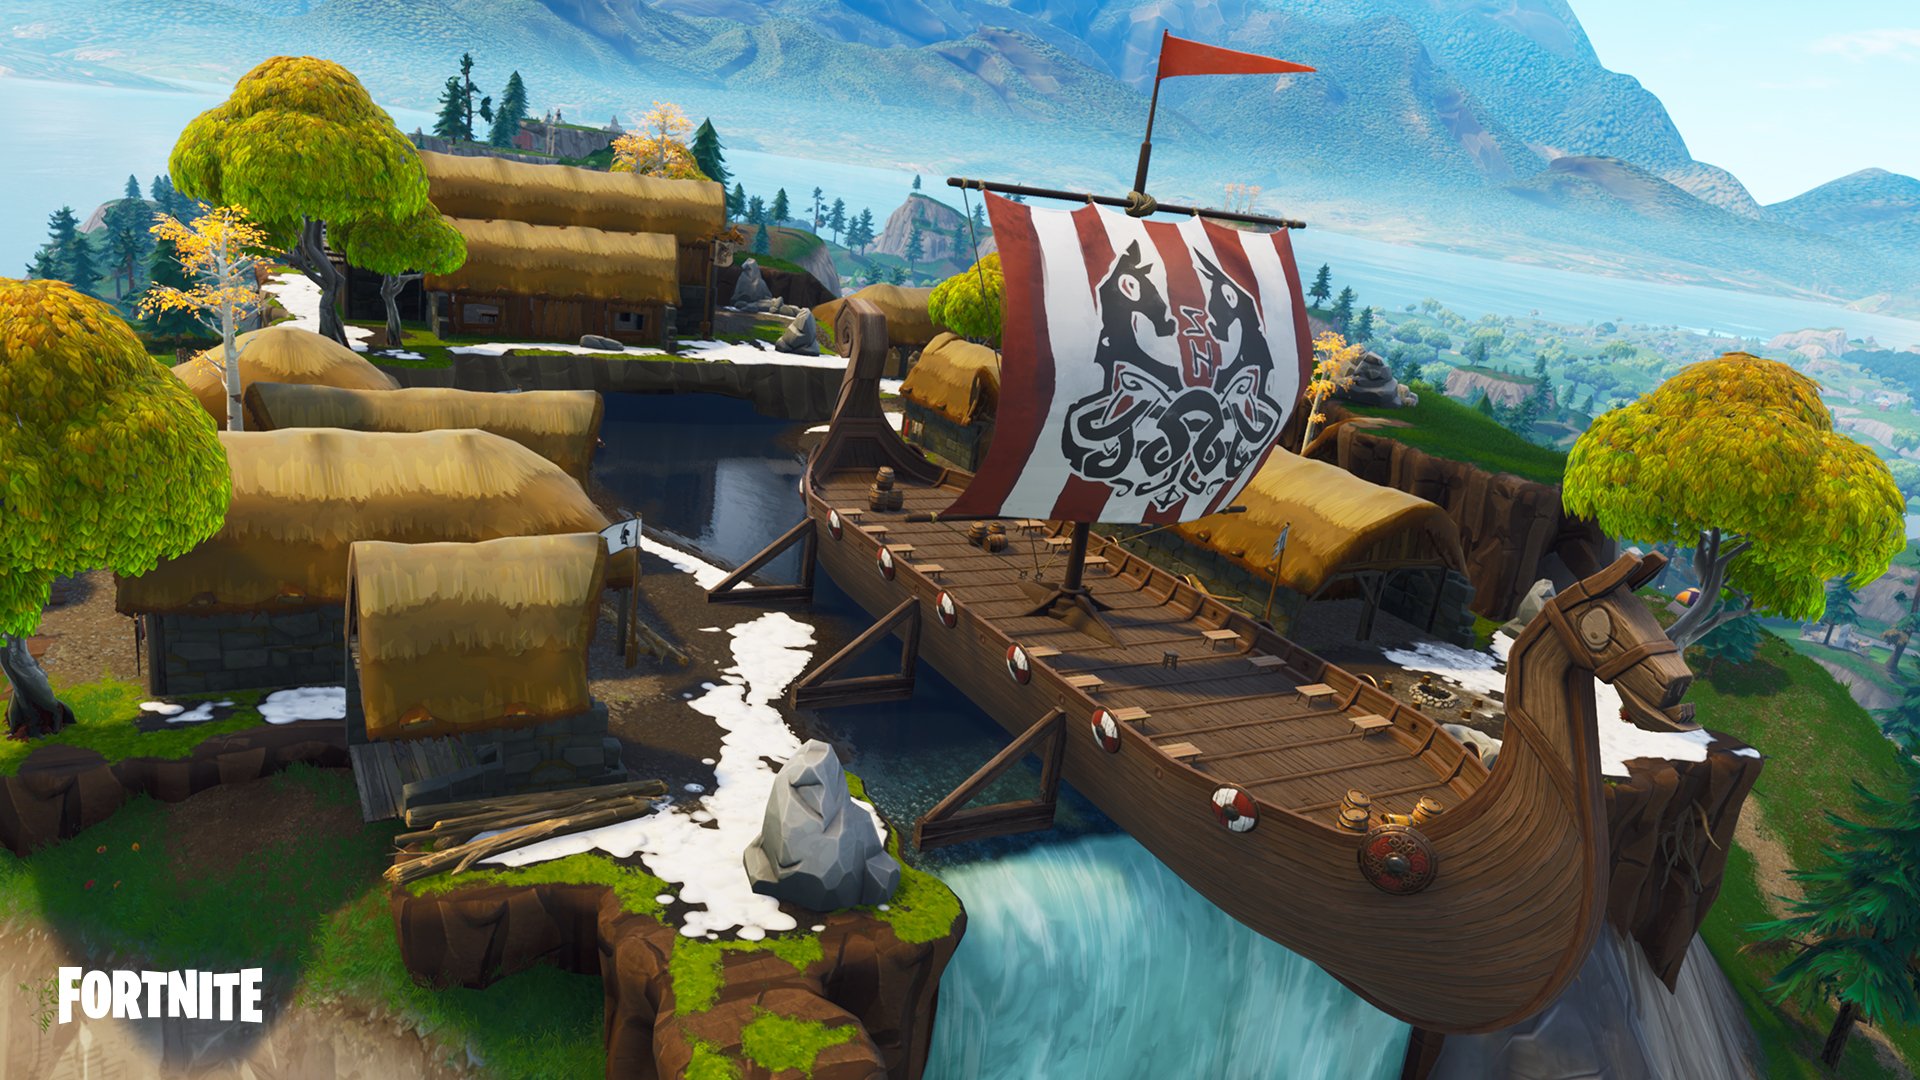 Fortnite on Twitter: "Send your opponents over the ... - 1920 x 1080 jpeg 402kB